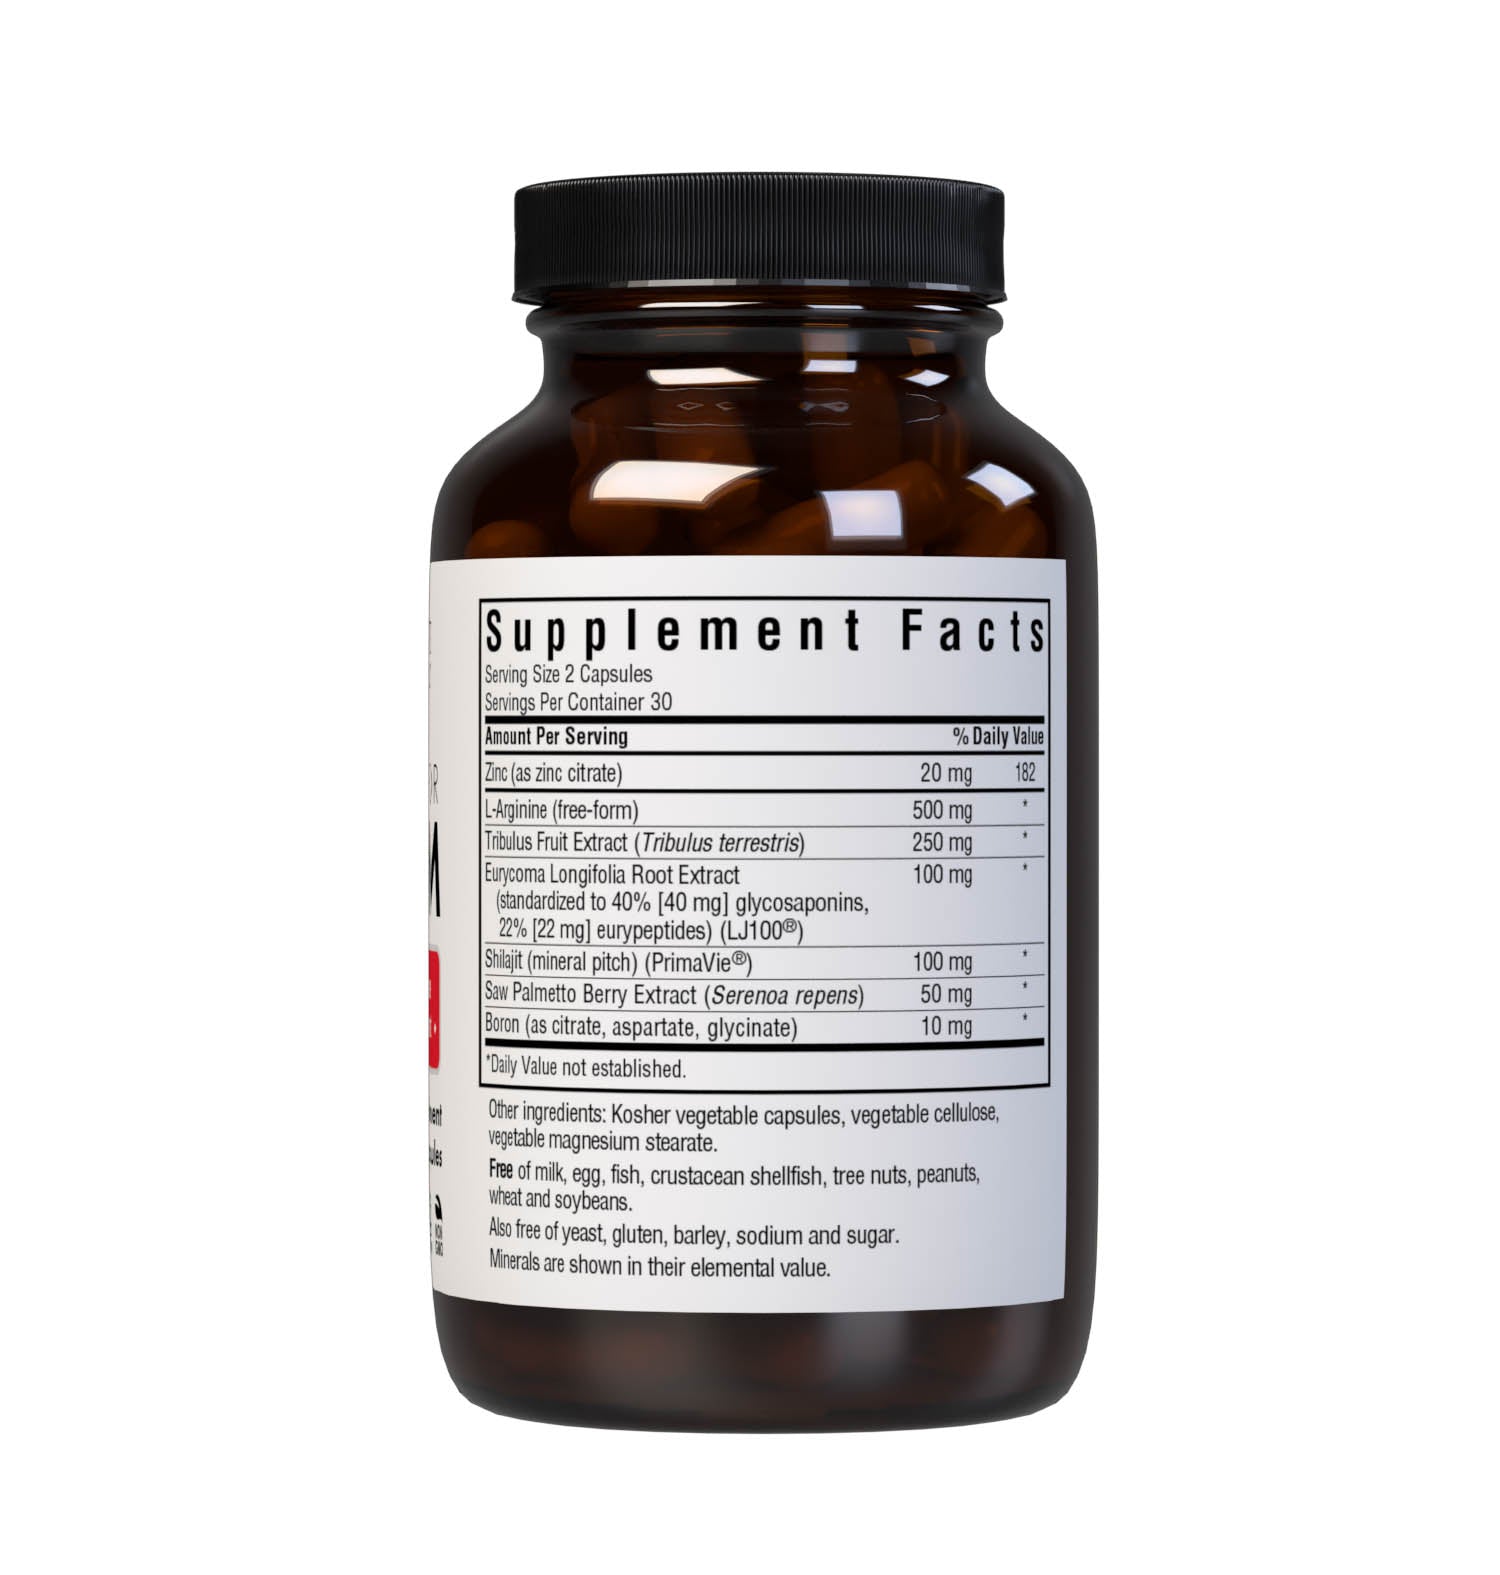 Bluebonnet’s Intimate Essentials For Him Testosterone & Libido Boost Vegetable Capsules are specially formulated to help stimulate a man’s sexual chemistry by amplifying testosterone and libido levels. Supplement facts panel. #size_60 count